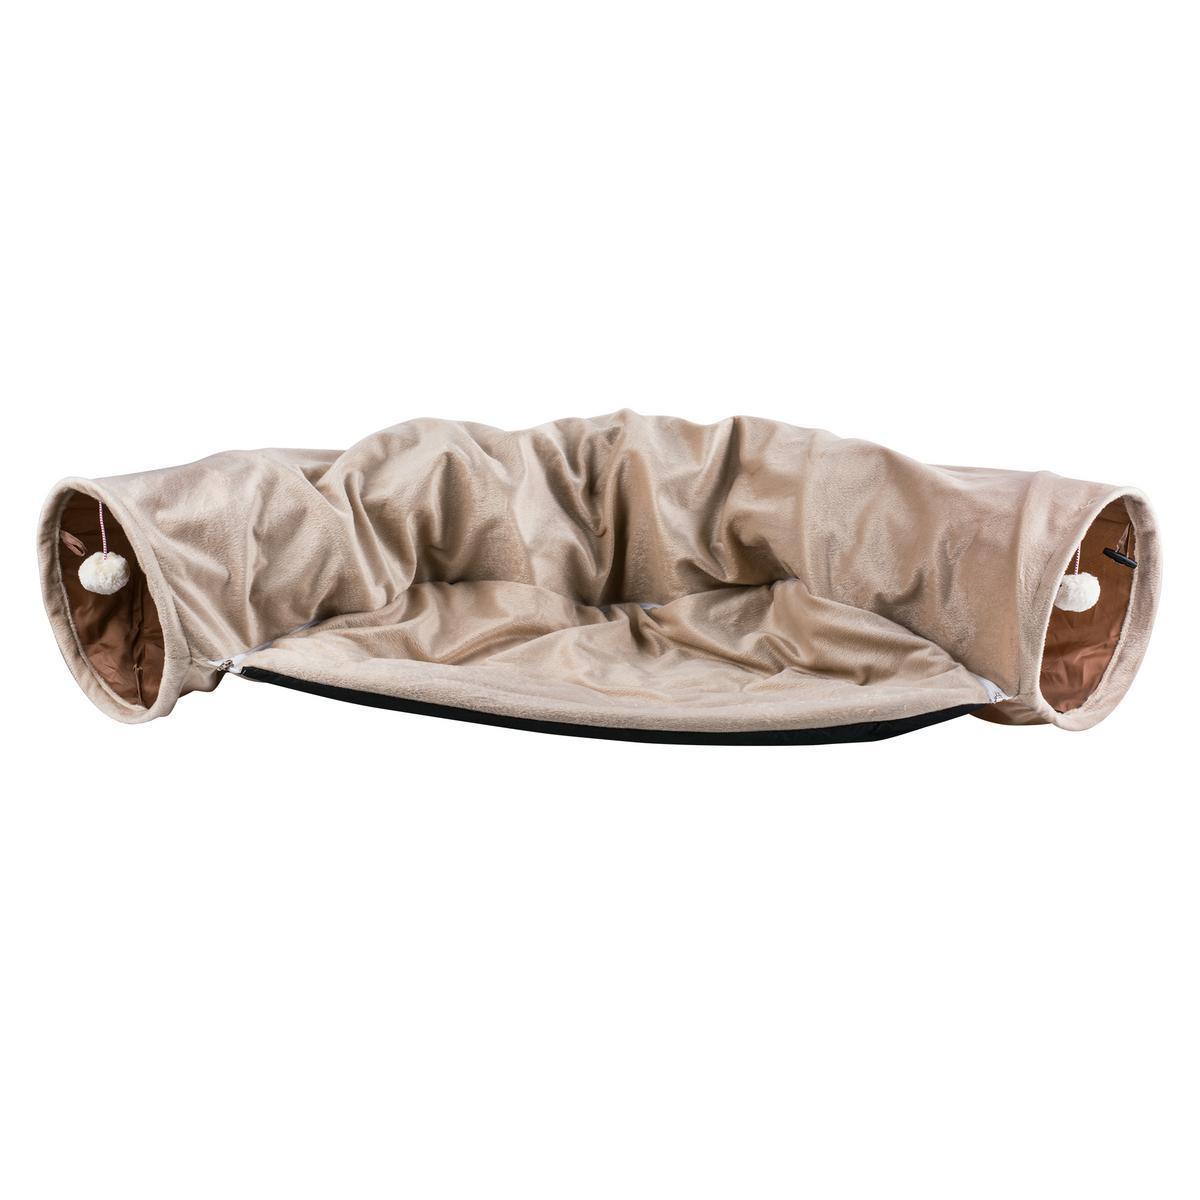 Tunnel pour chat avec tapis - 100 % Polyester - 116 x 60 x H 26 cm - Beige